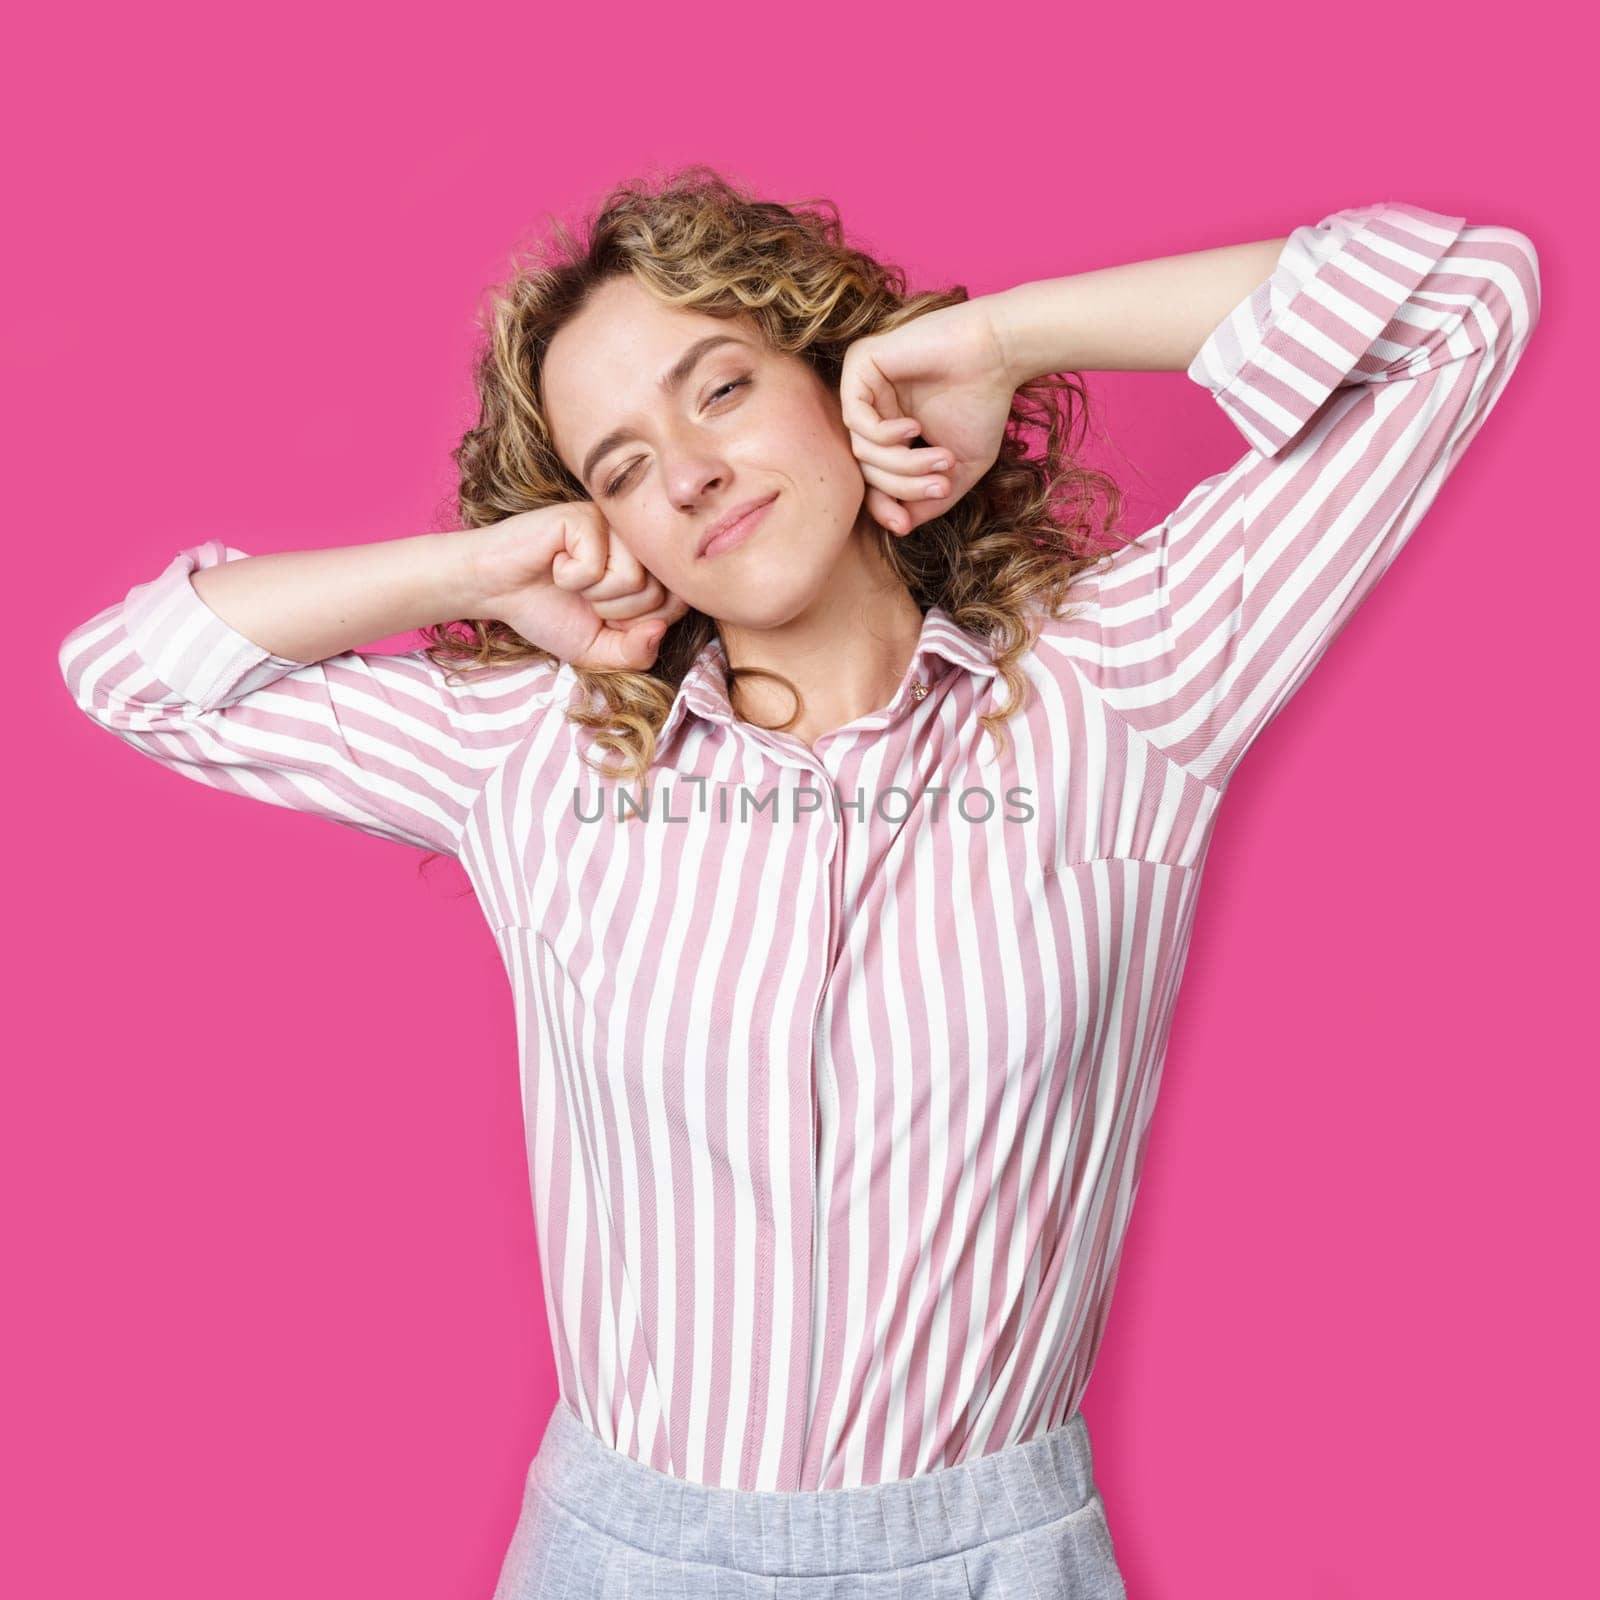 Young woman stretching out her hands after work. Isolated on pink background